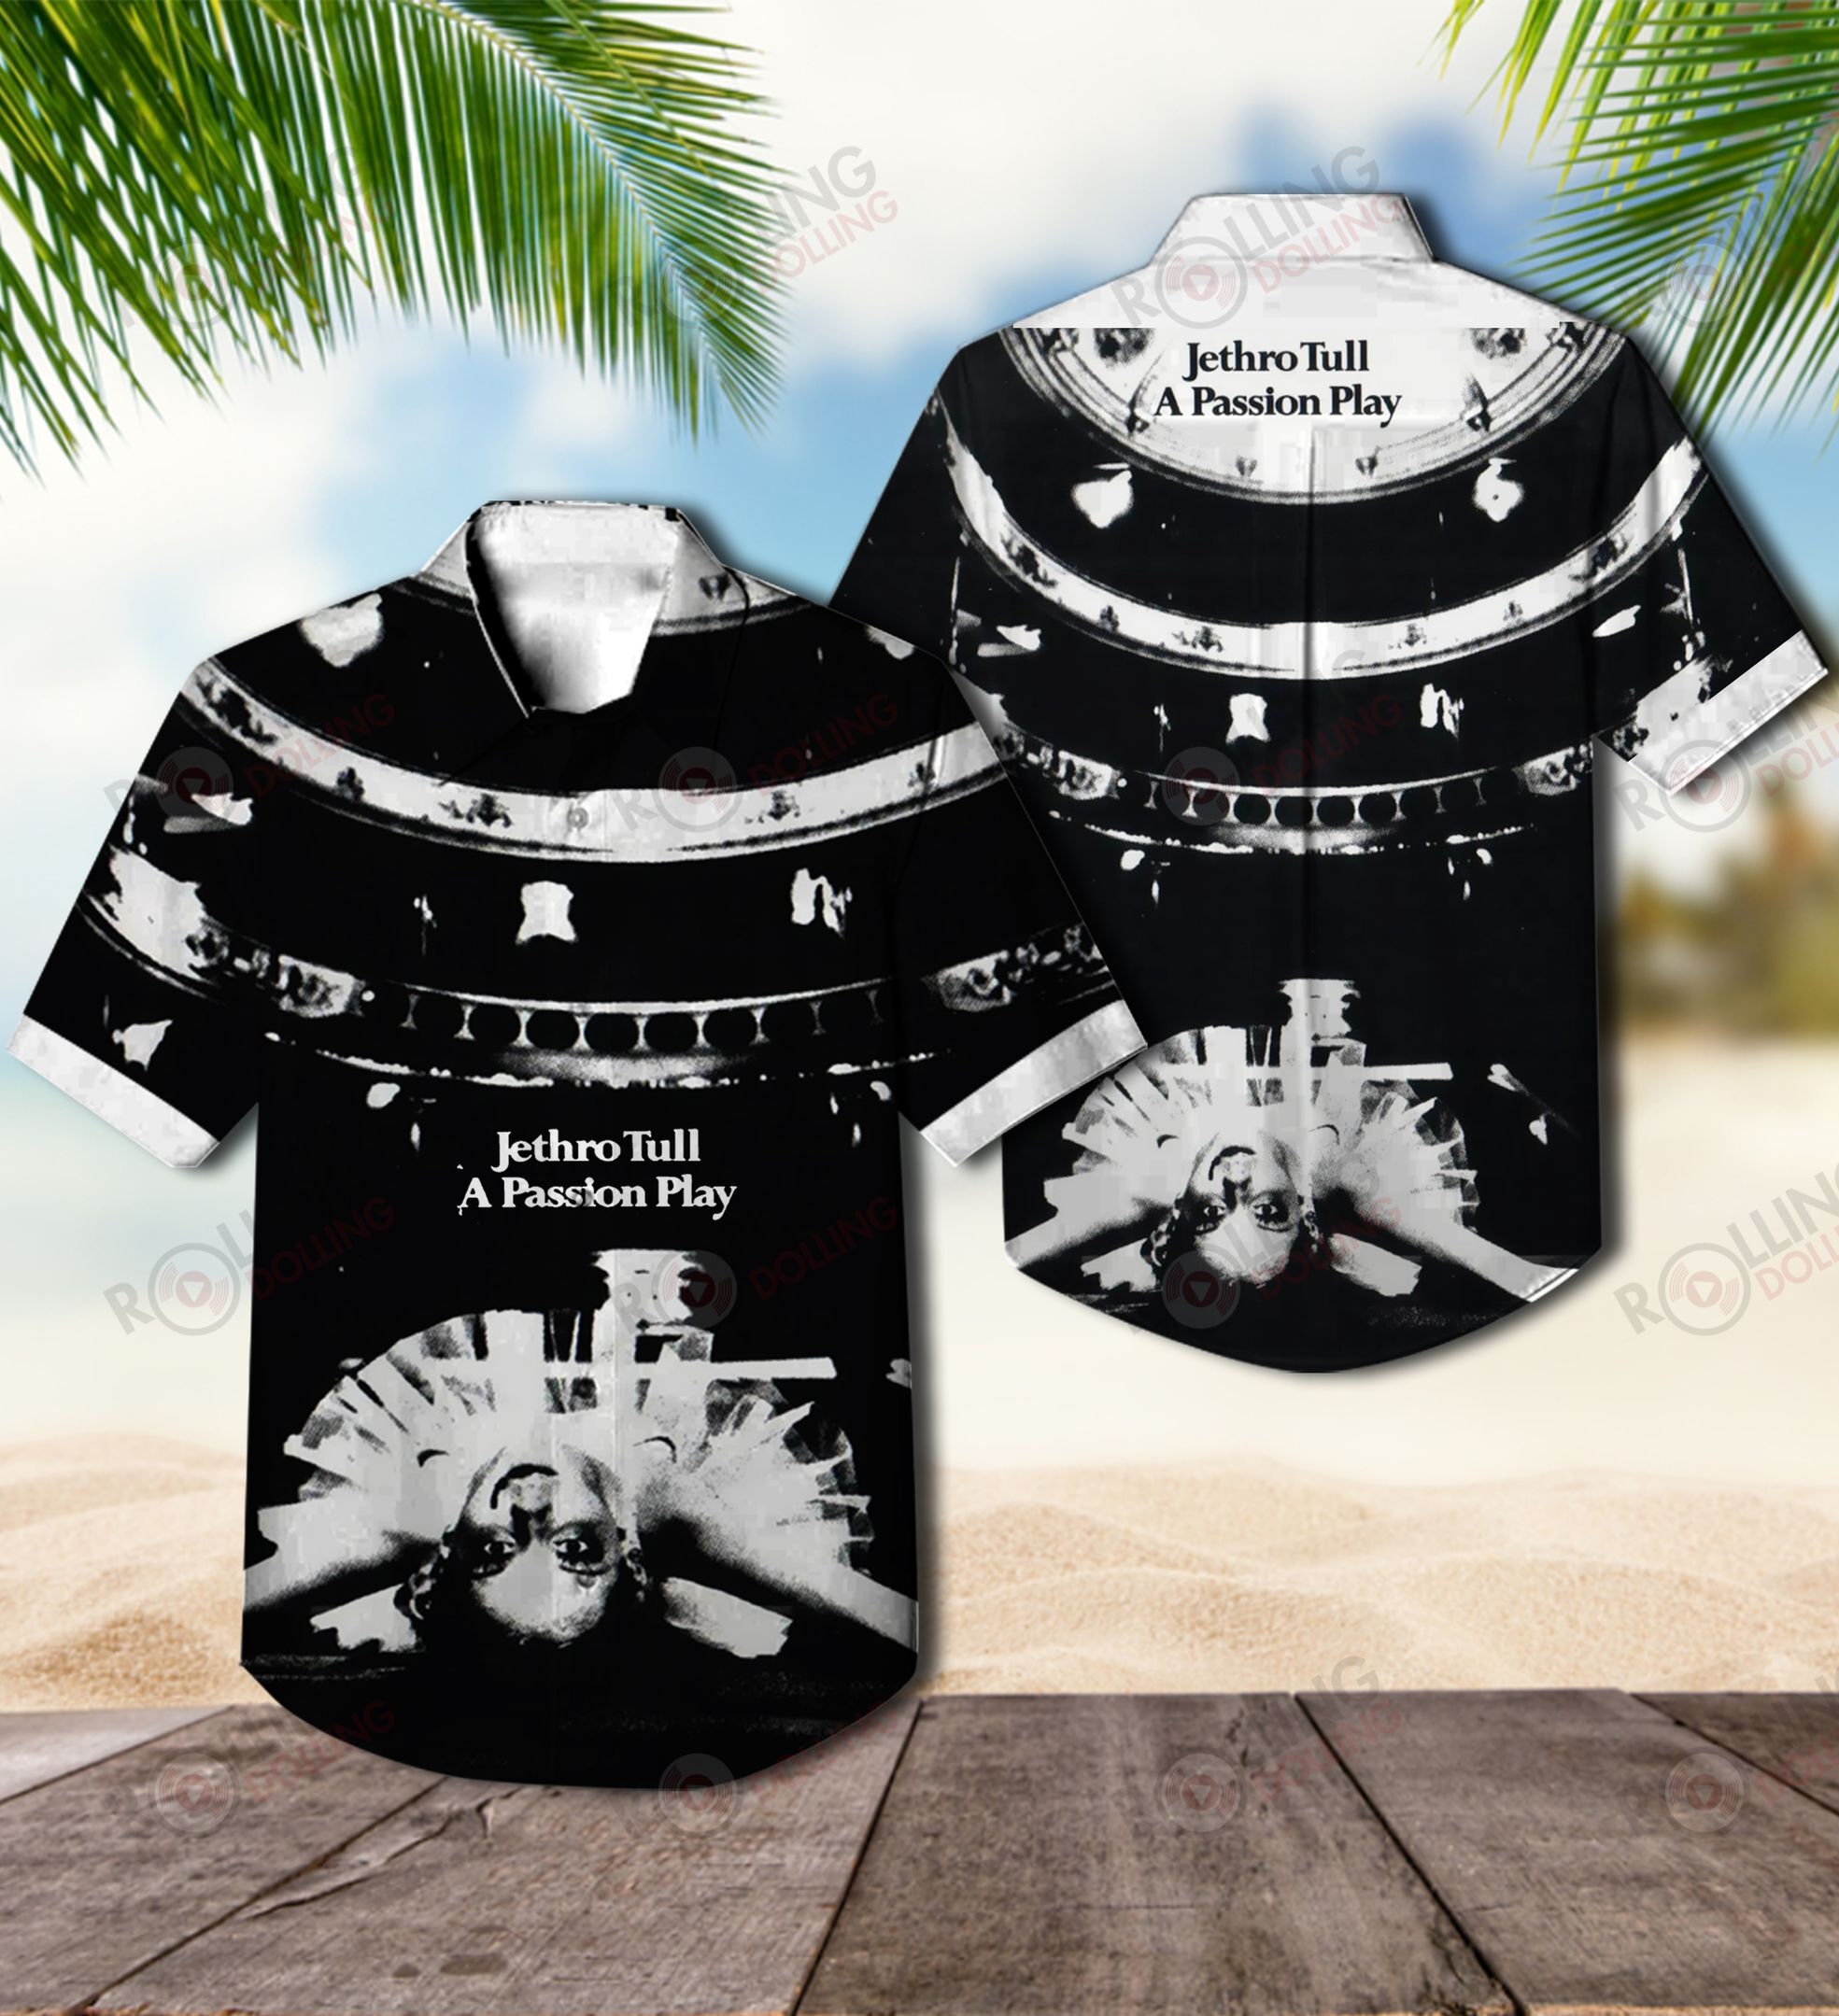 This would make a great gift for any fan who loves Hawaiian Shirt as well as Rock band 66